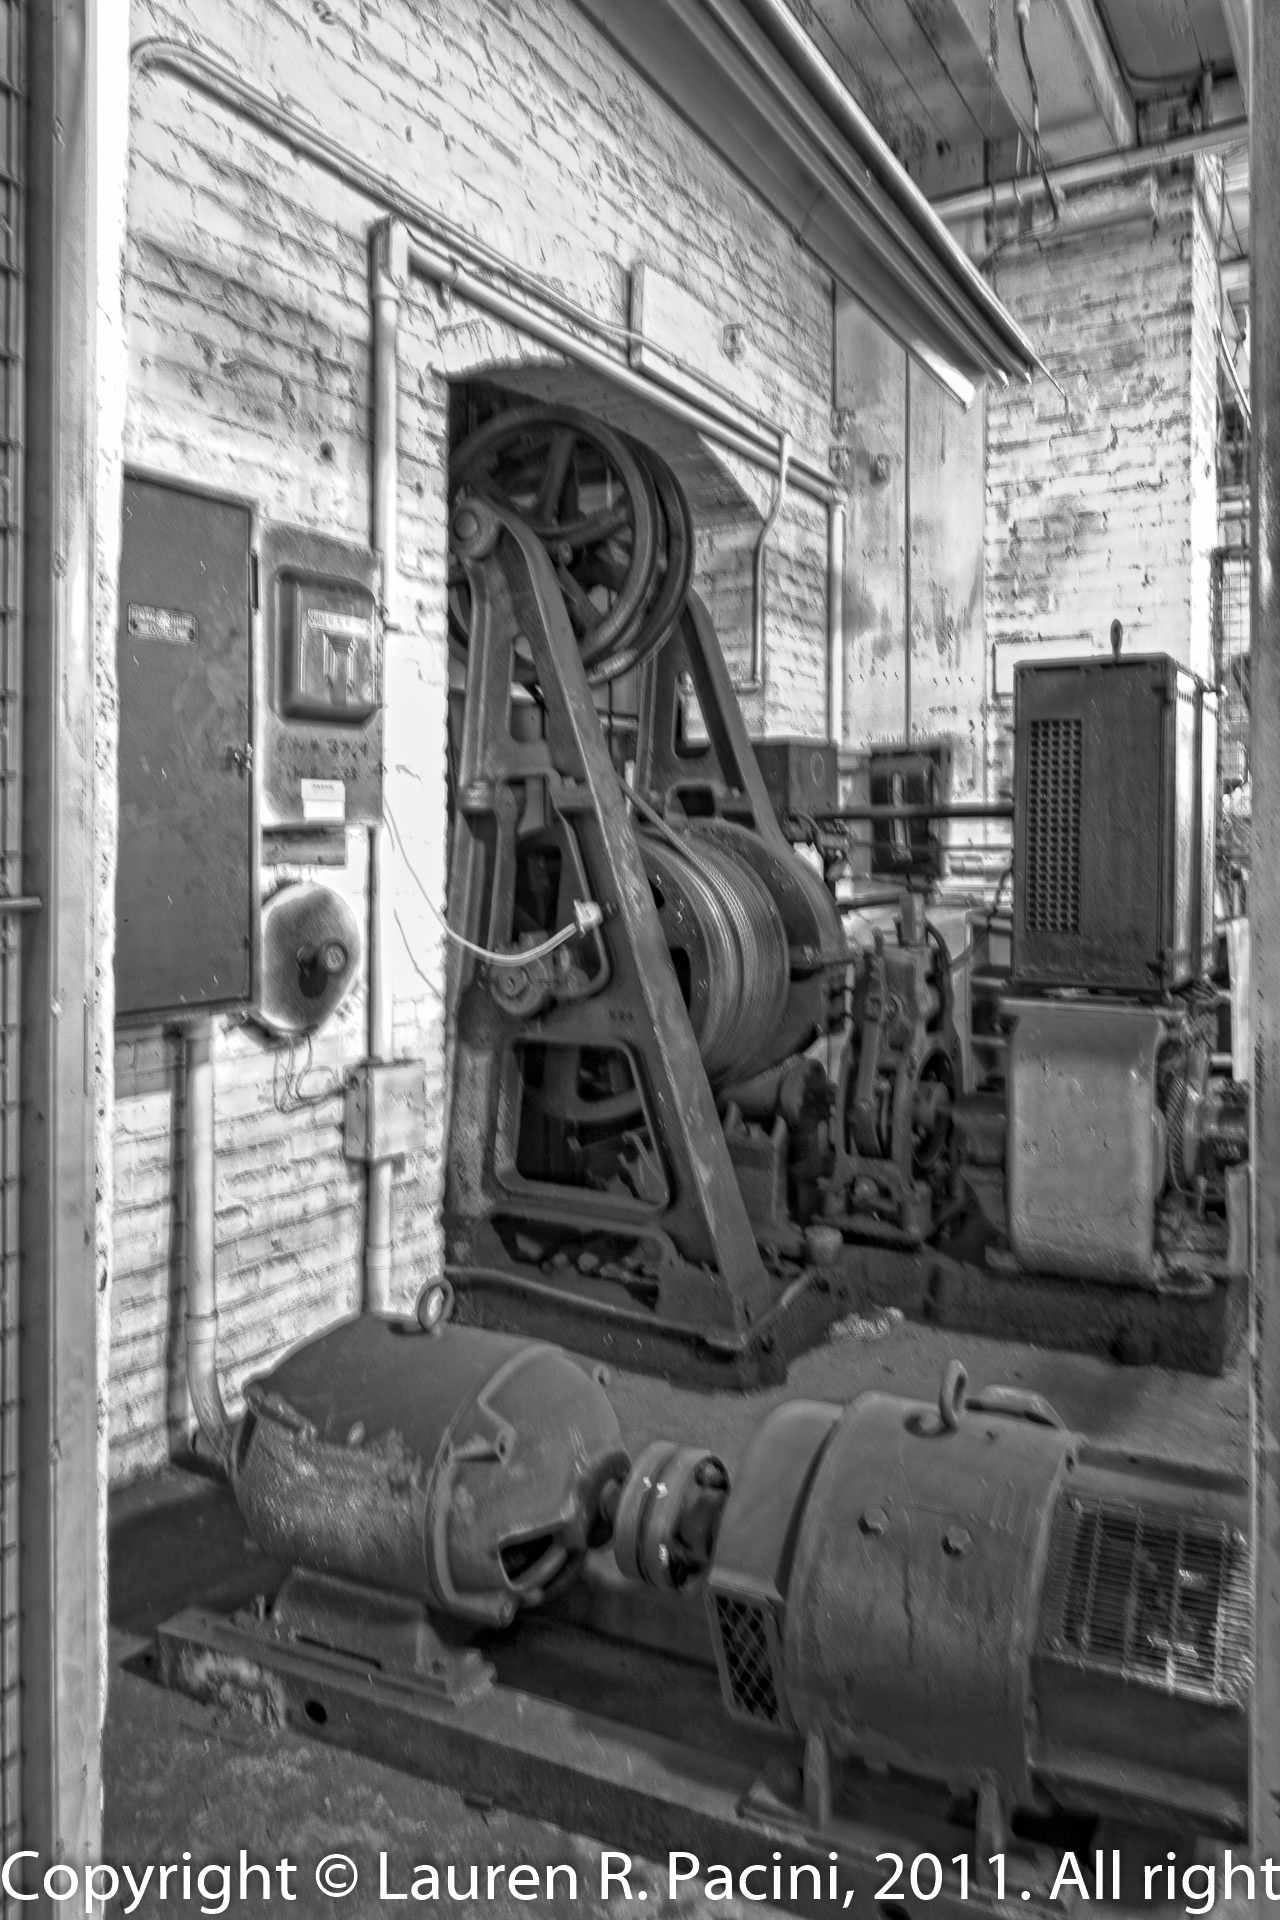 The Motor that Still Drives the Elevator More than 100 Years Later